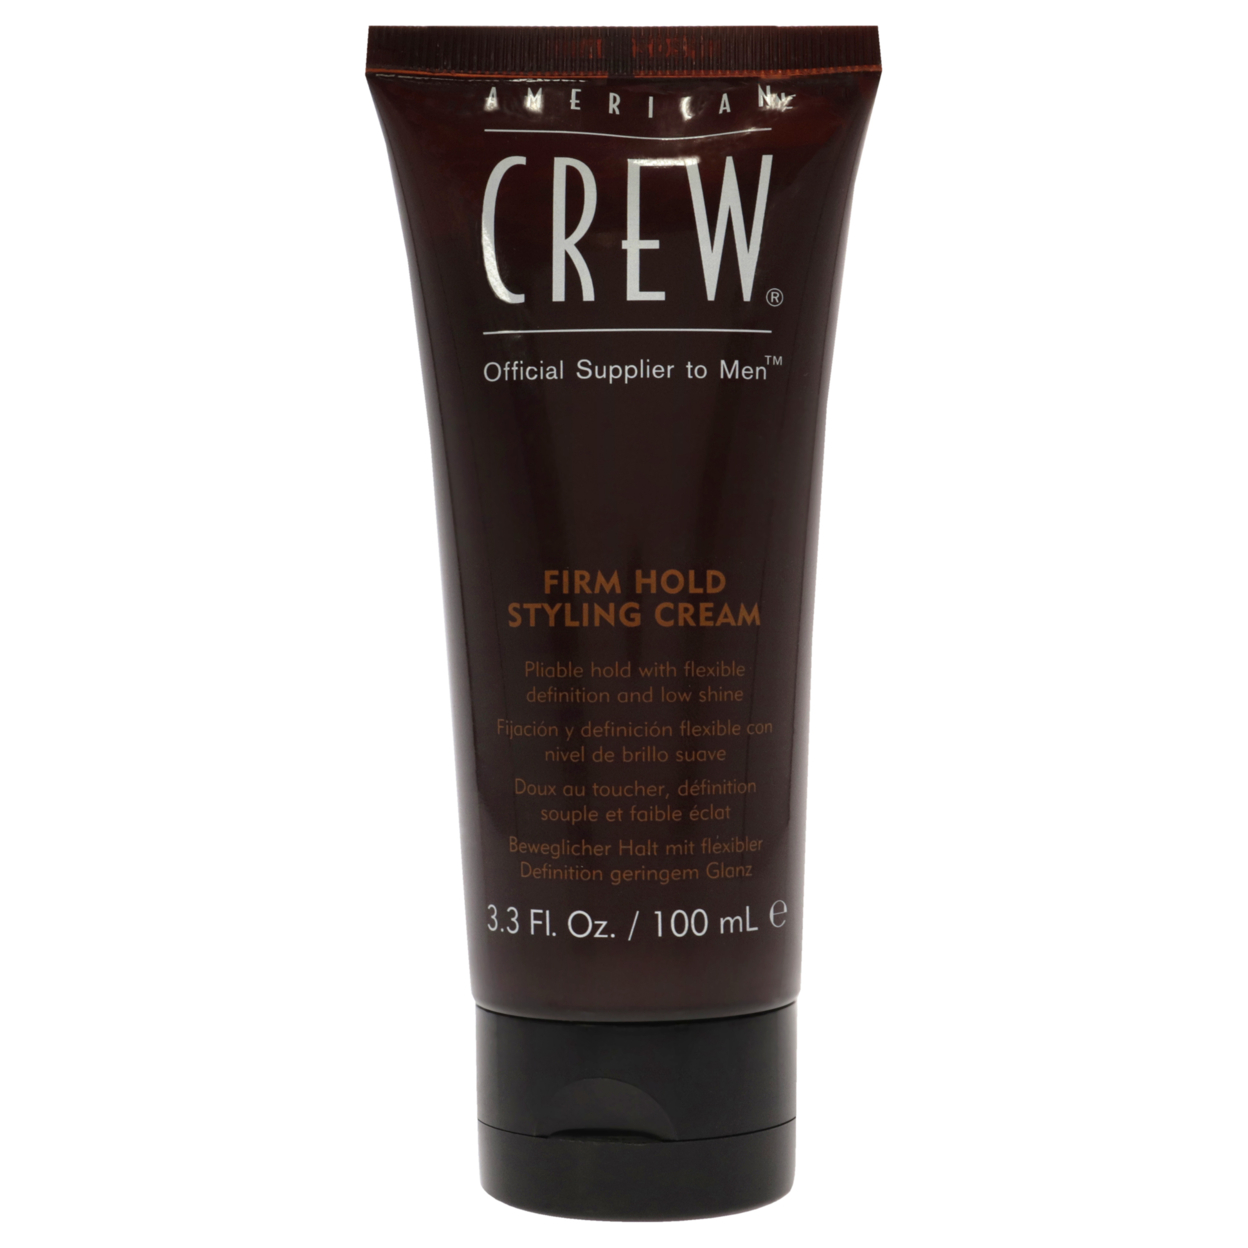 American Crew Firm Hold Styling Cream 3.3oz - image 1 of 3